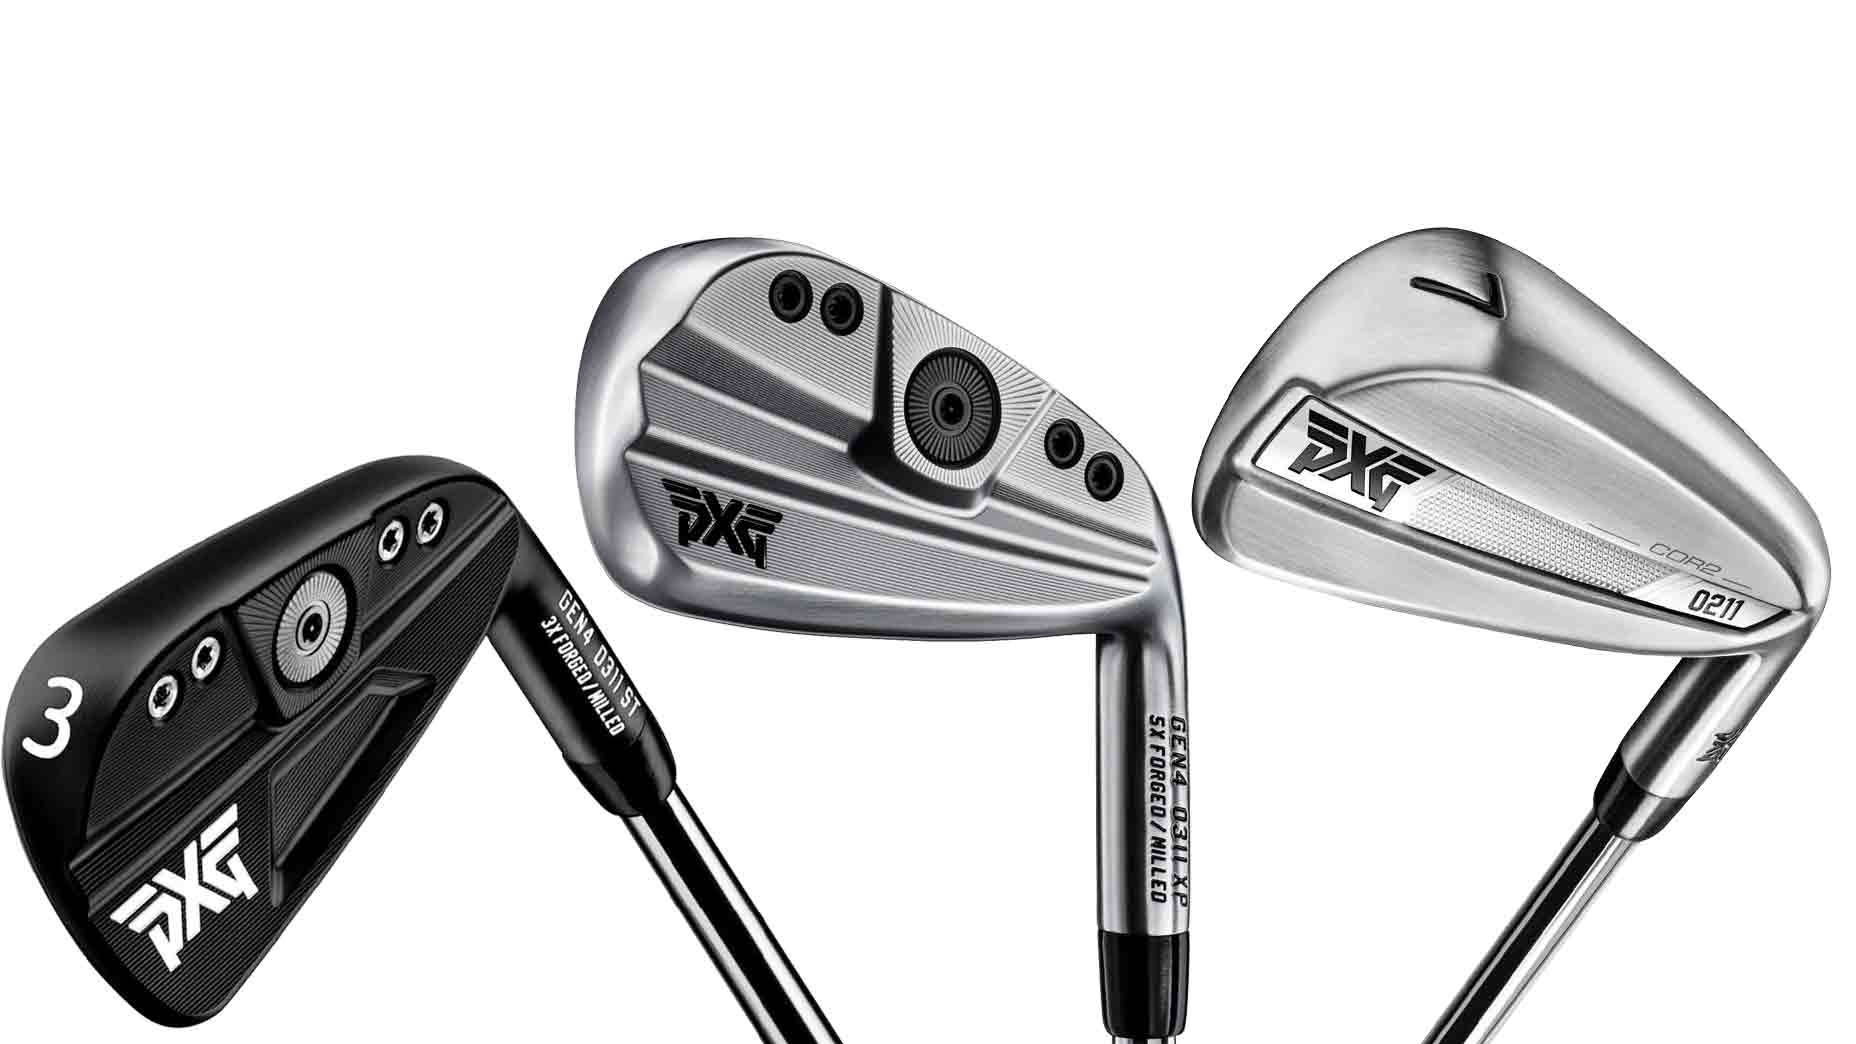 PXG Pike's Irons Clinic